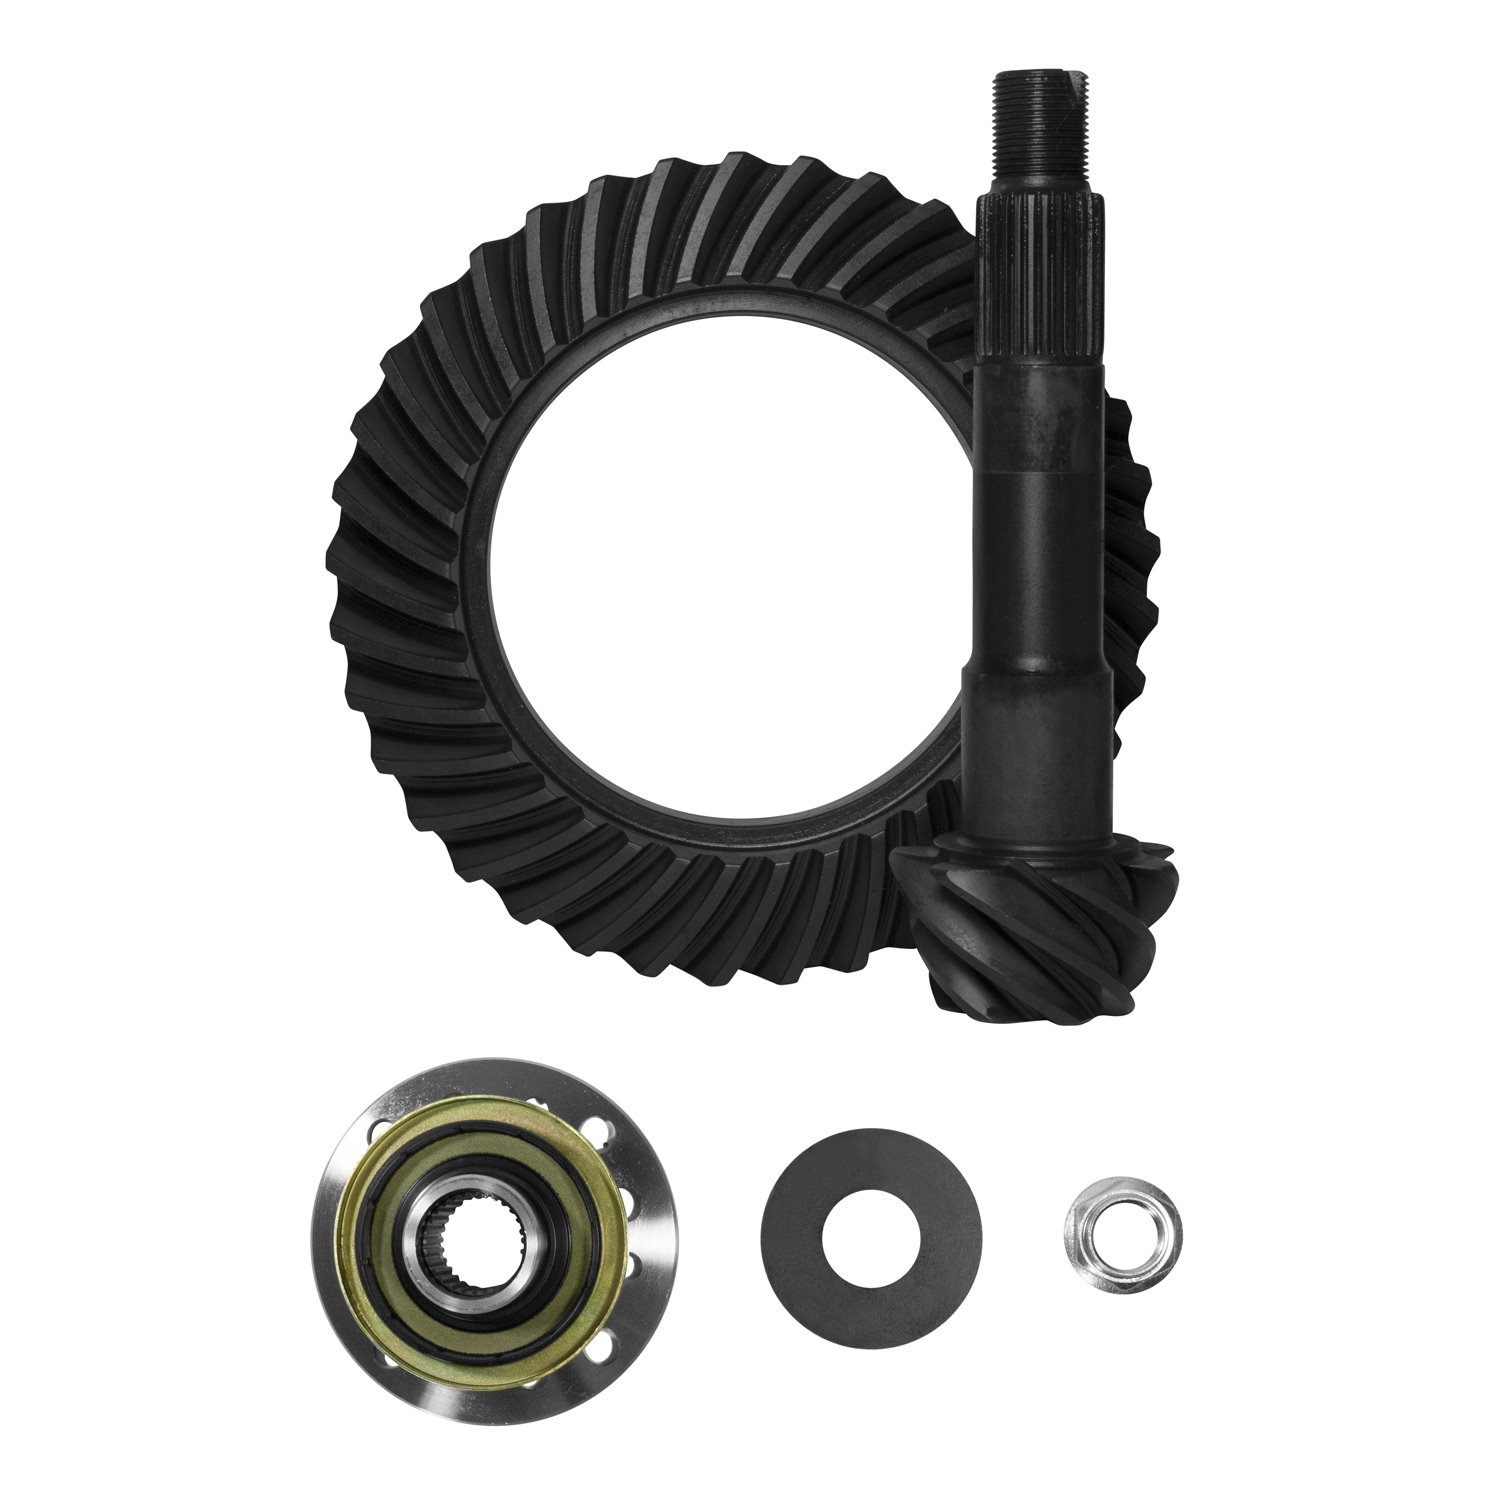 USA Standard ZG T8-488K Ring & Pinion Gear Set, For Toyota 8 in., 4.88 Ratio